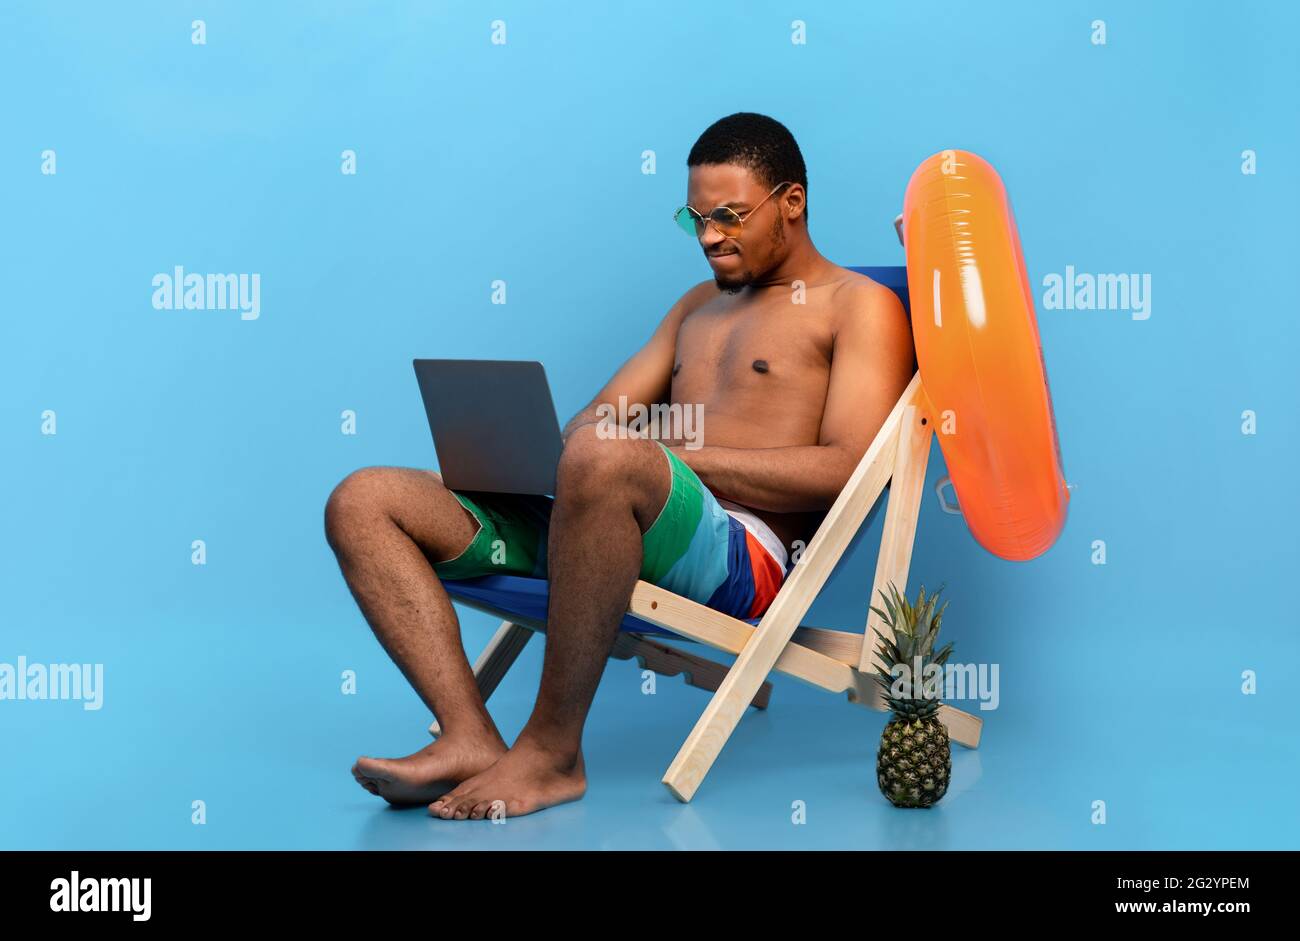 Computer problems. Frustrated black guy having trouble with laptop while sitting in lounge chair on summer vacation Stock Photo